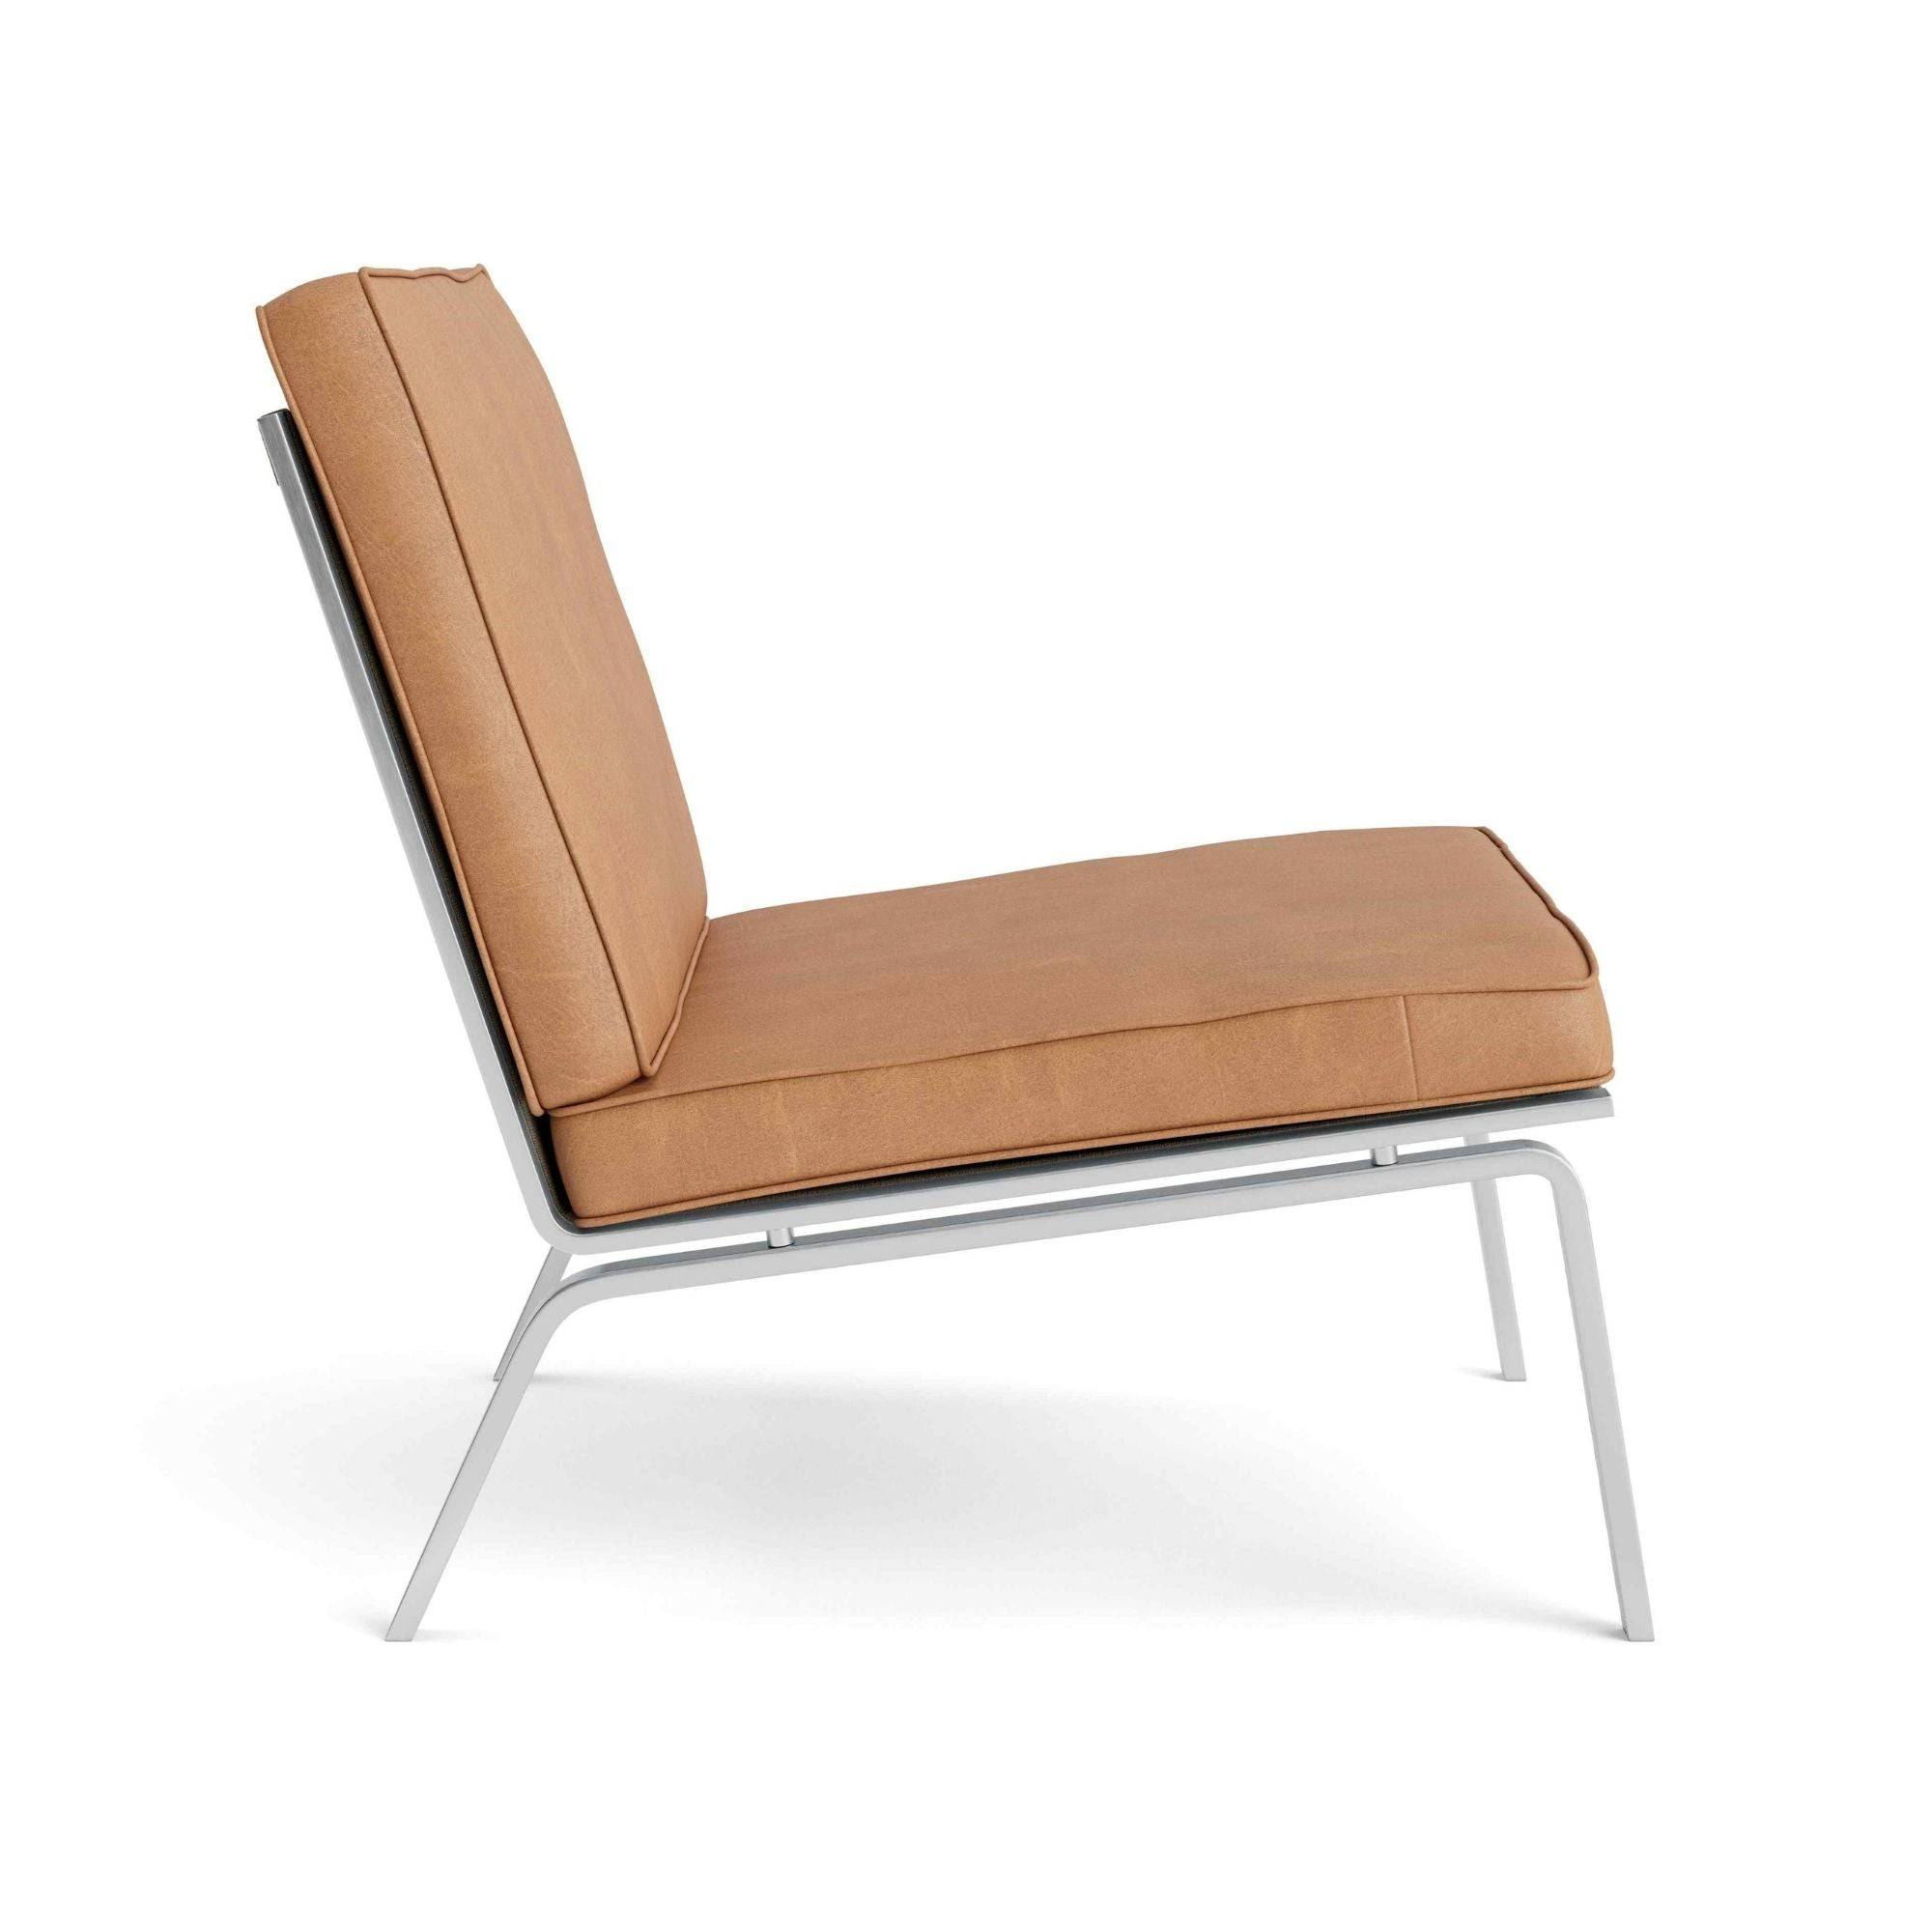 Man Lounge Chair - Leather